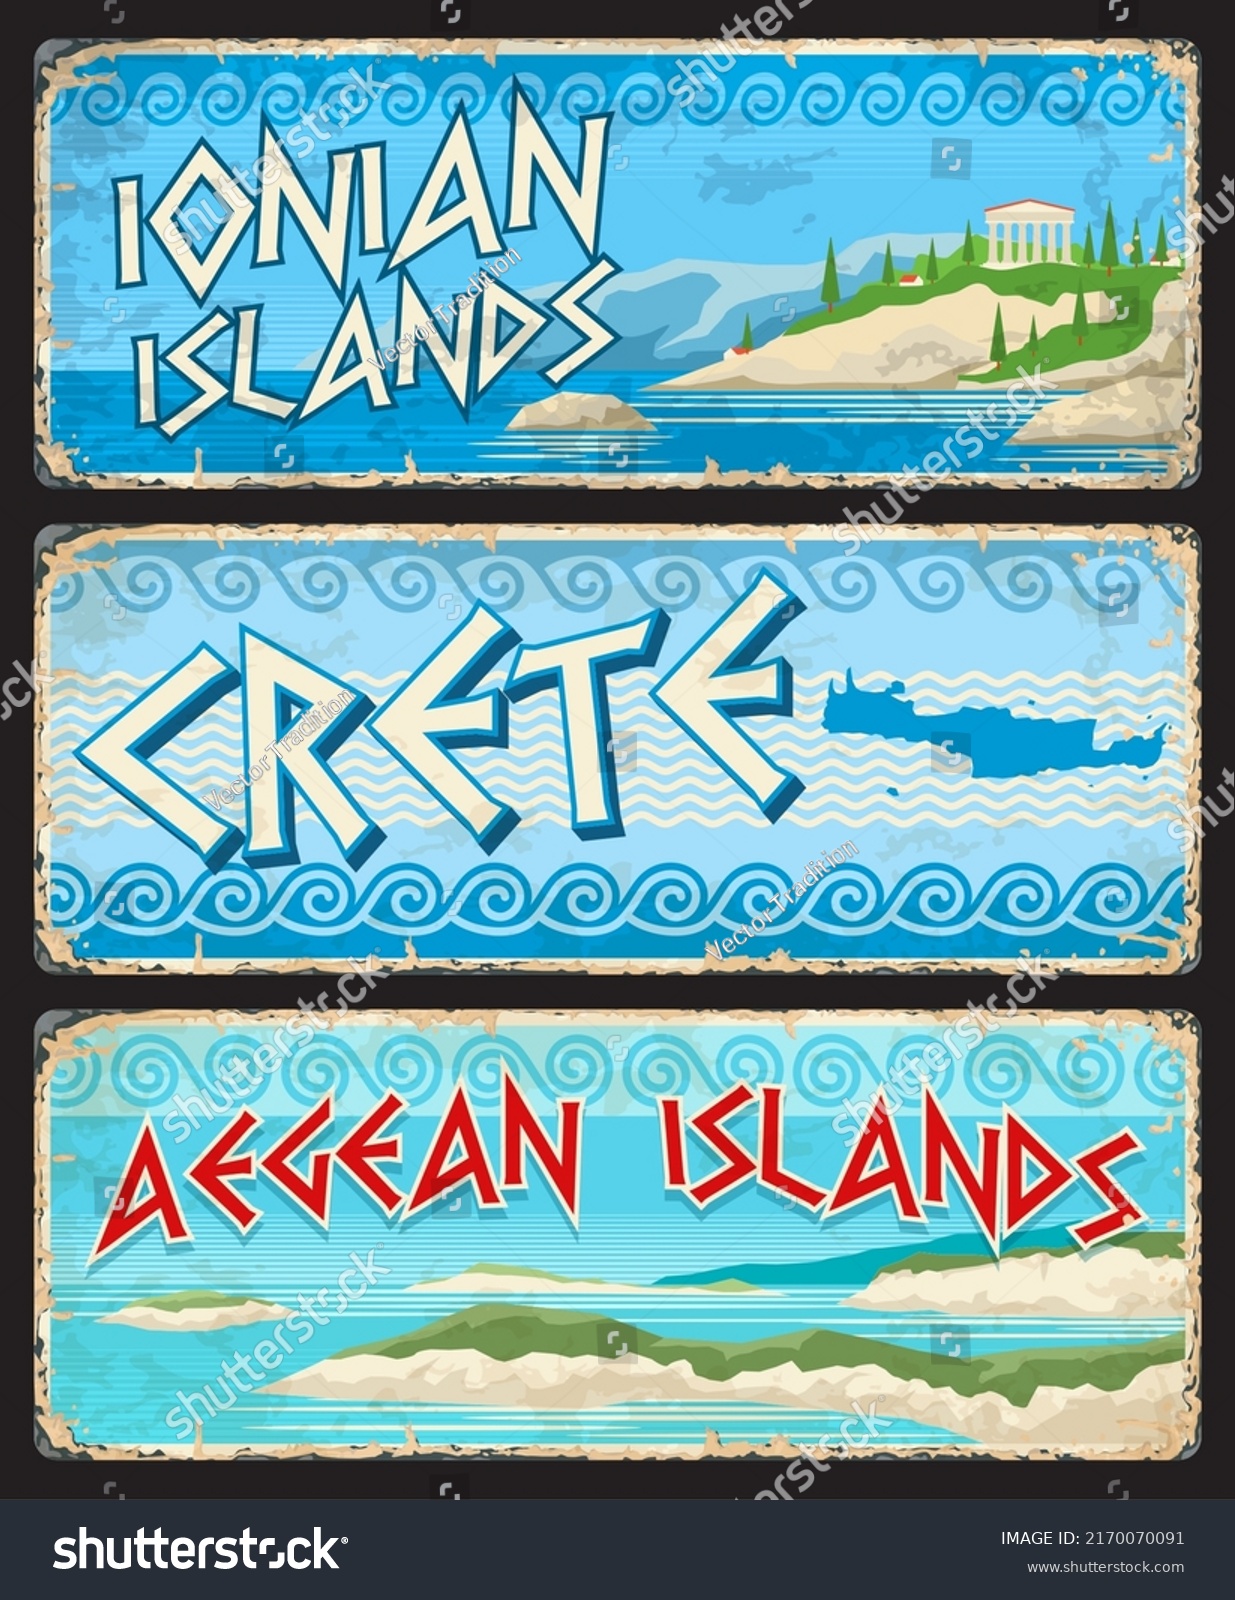 SVG of Crete, Ionian and Aegean islands, Greek regions travel stickers and plates, vector tin signs. Greece vintage tourist luggage tags with Greek provinces landmarks and region emblems on metal plates svg